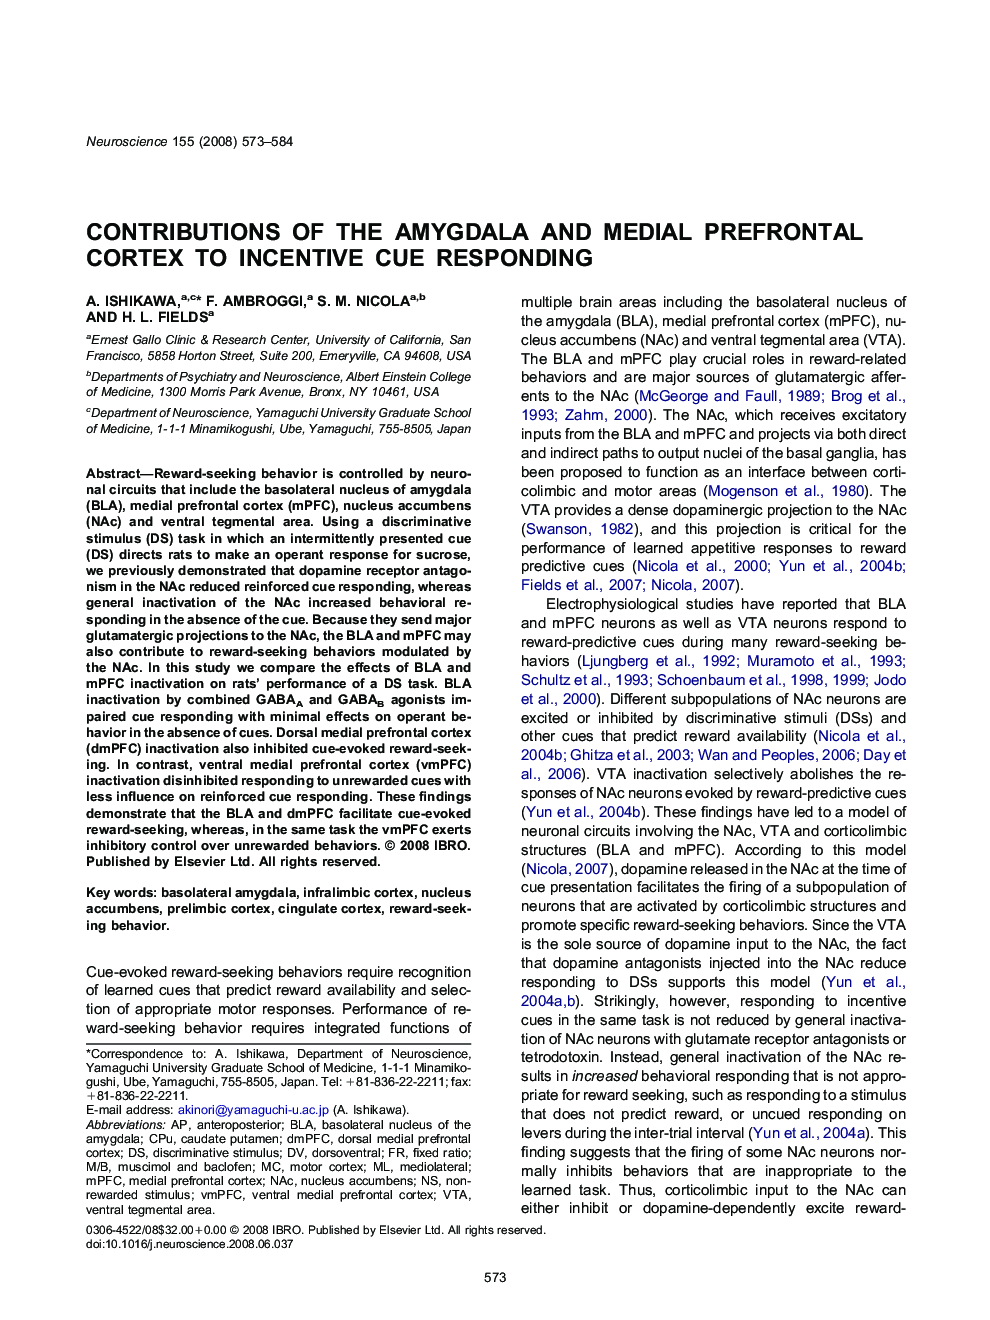 Contributions of the amygdala and medial prefrontal cortex to incentive cue responding